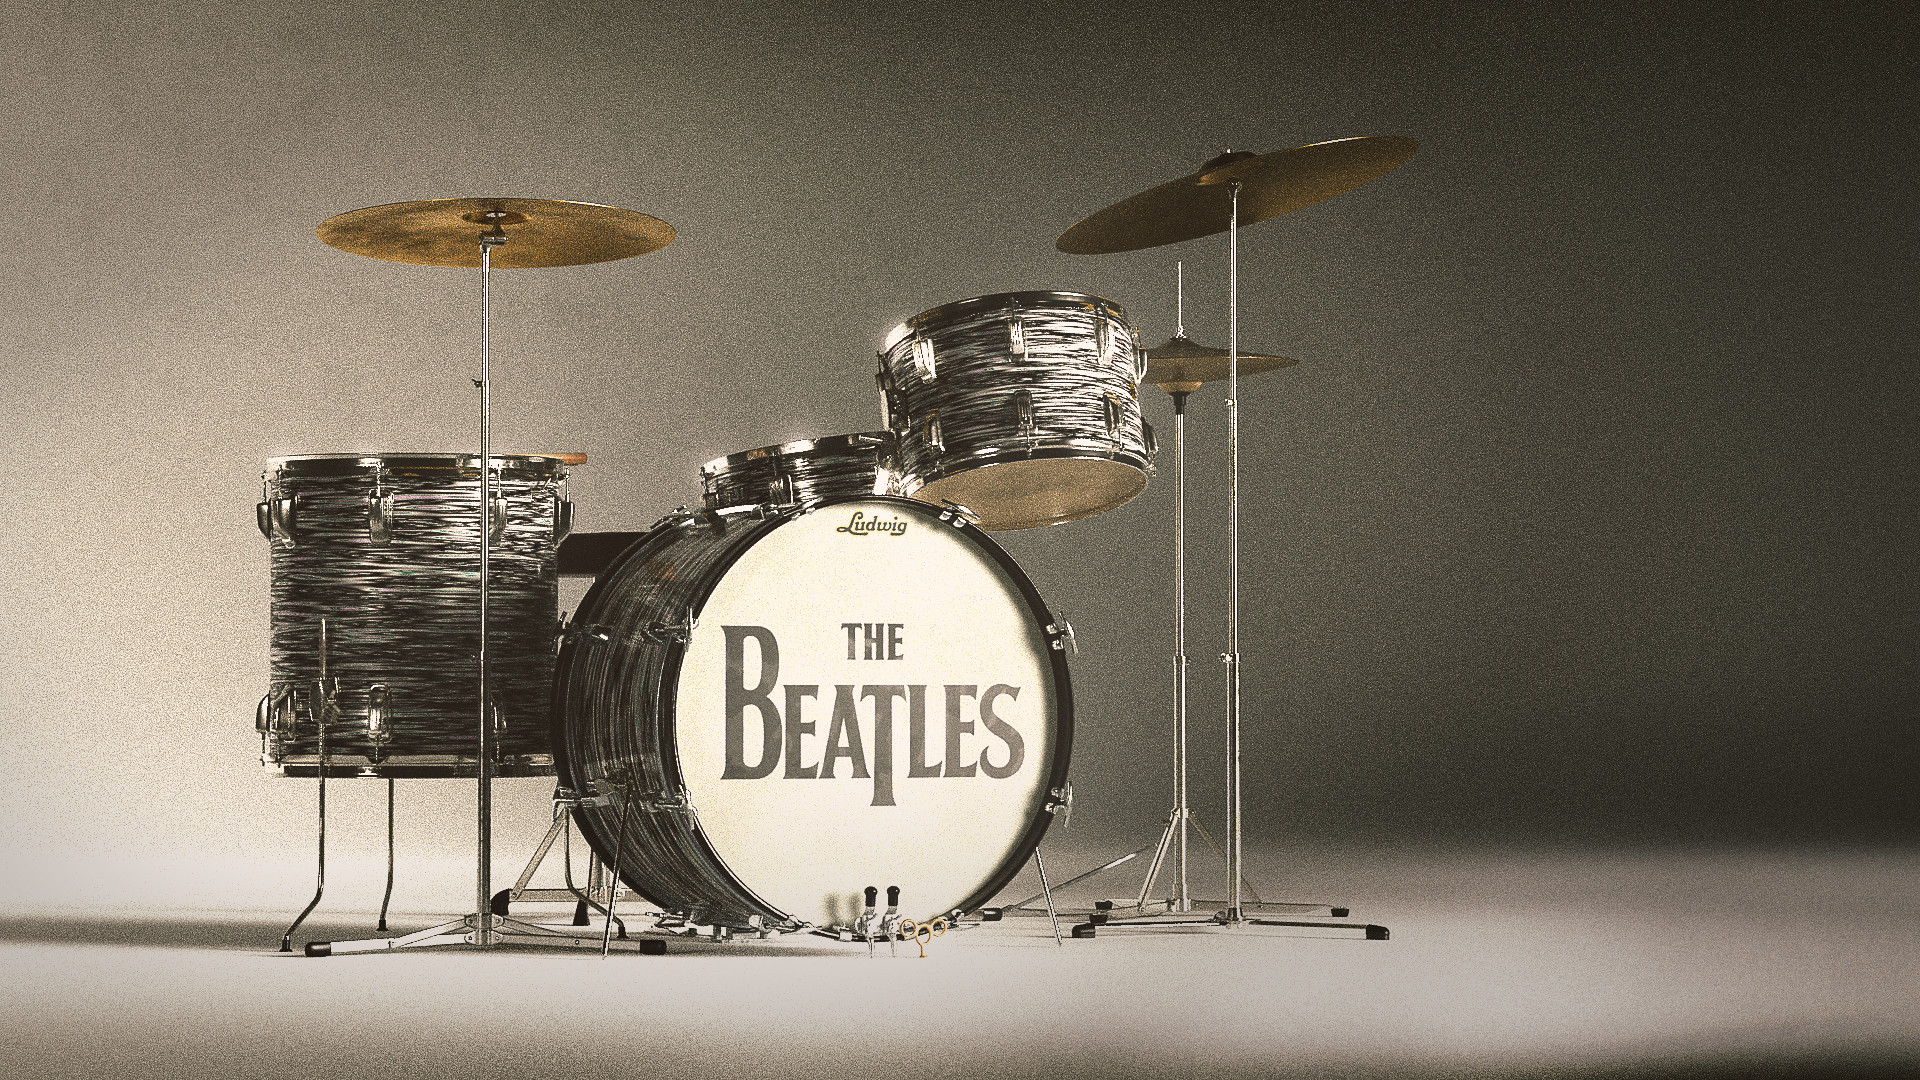 Taylor Cooper The Beatles Ludwig Oyster Black Pearl Drum Kit 3d Model